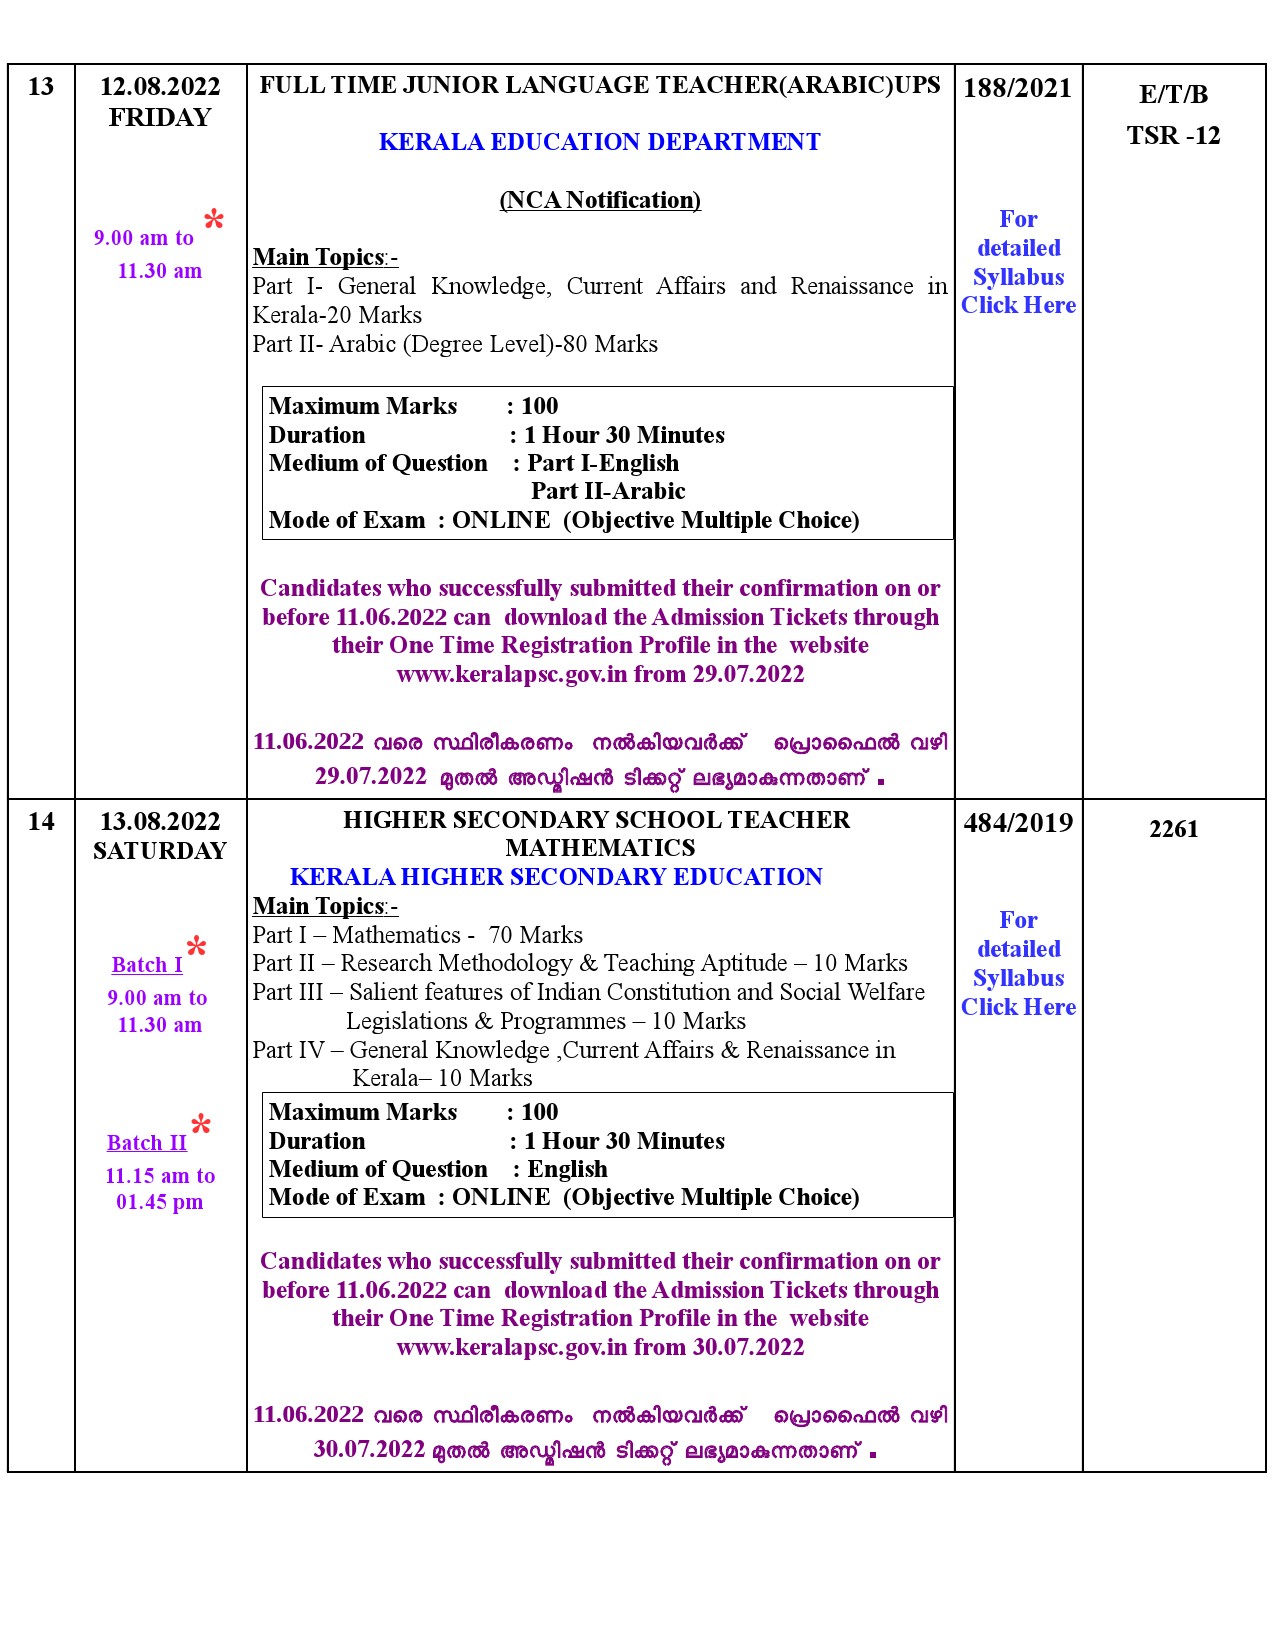 Examination Programme For The Month Of August 2022 - Notification Image 7